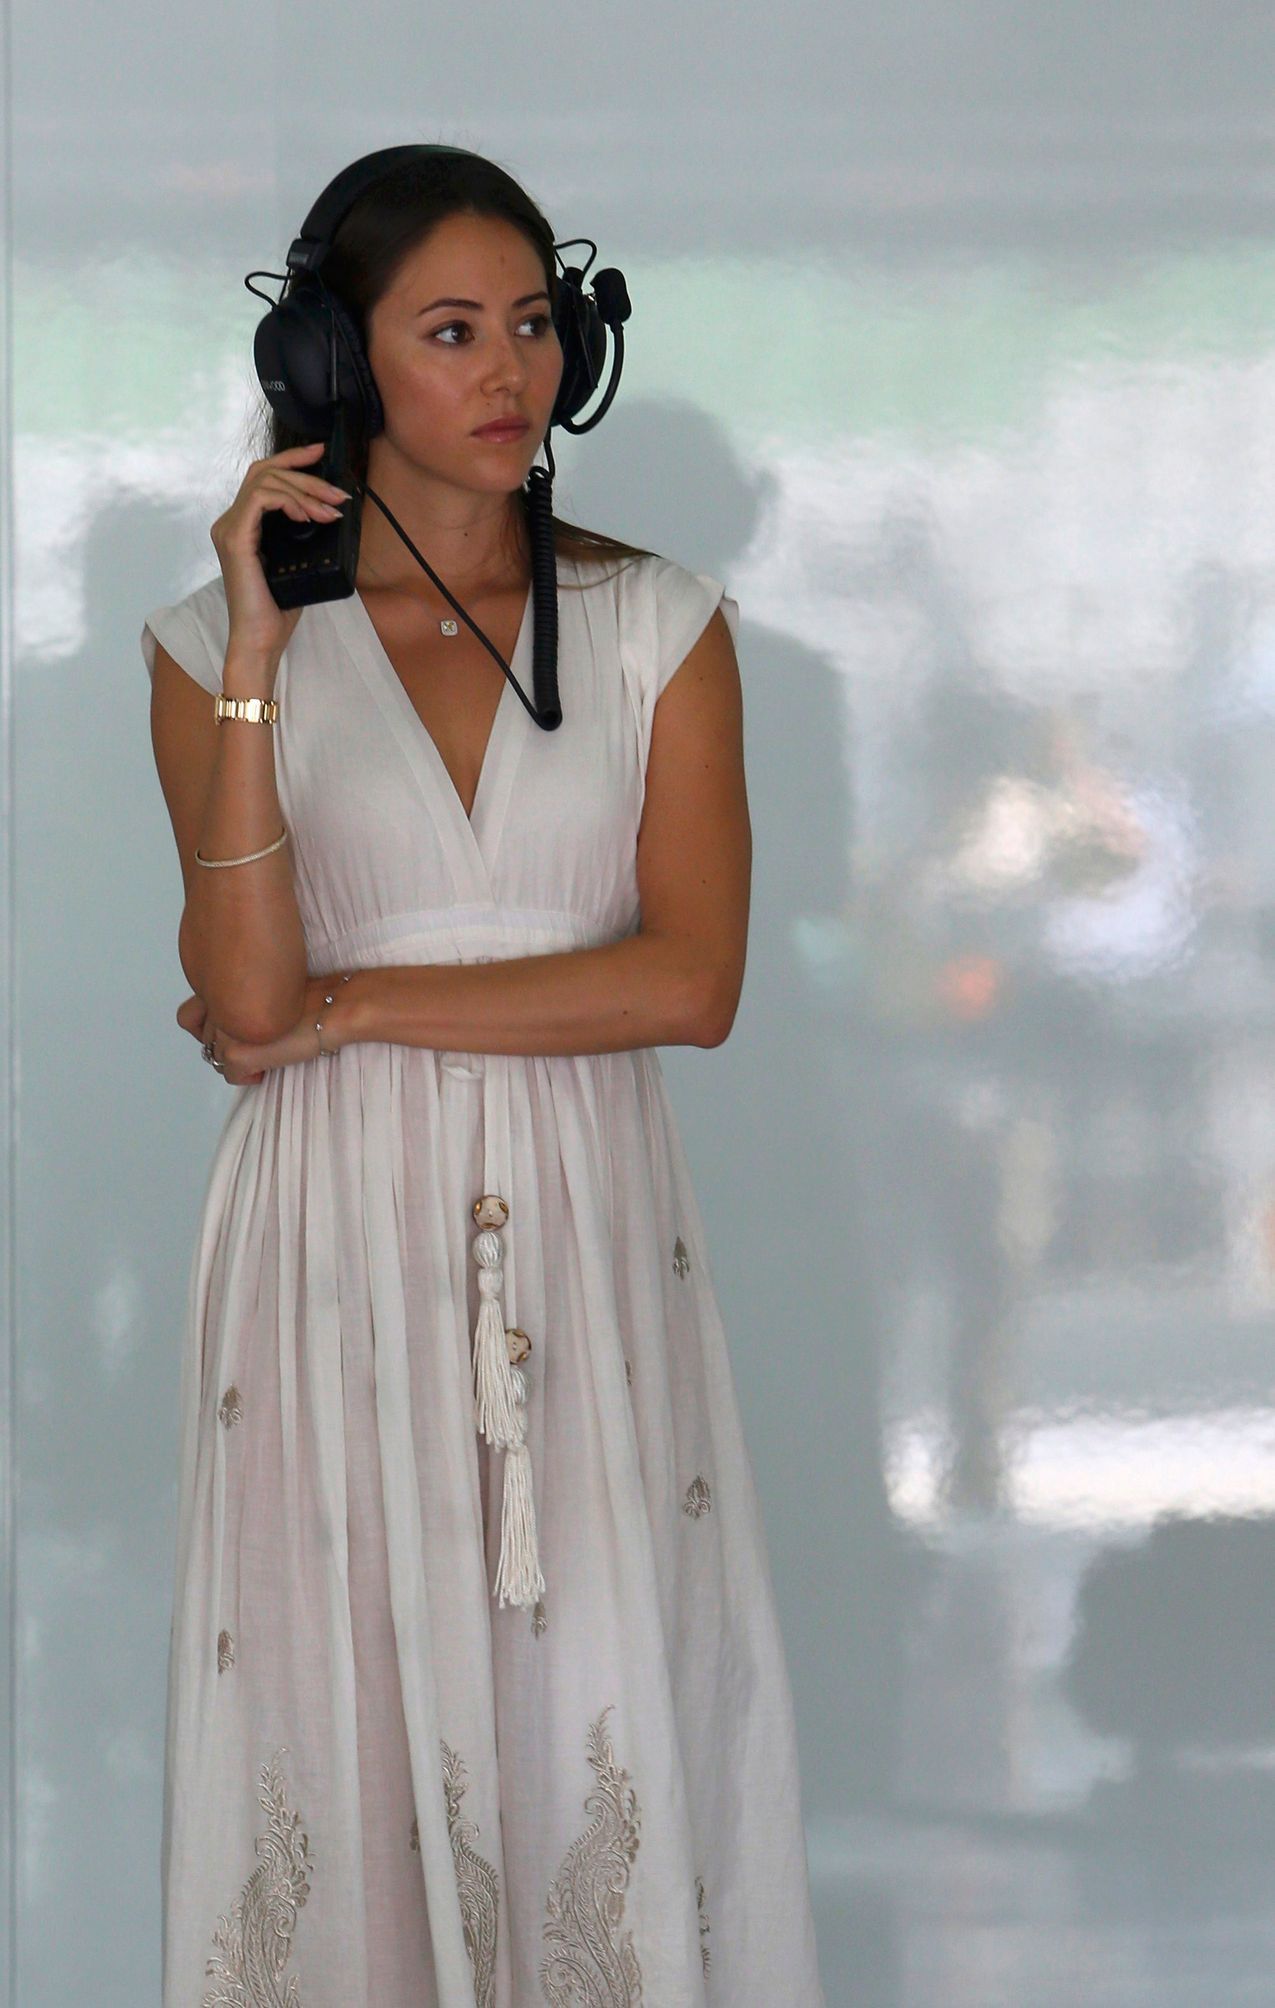 Jessica Michibata listens to the radio during the first practice session of the Malaysian F1 Grand Prix at Sepang International Circuit outside Kuala Lumpur